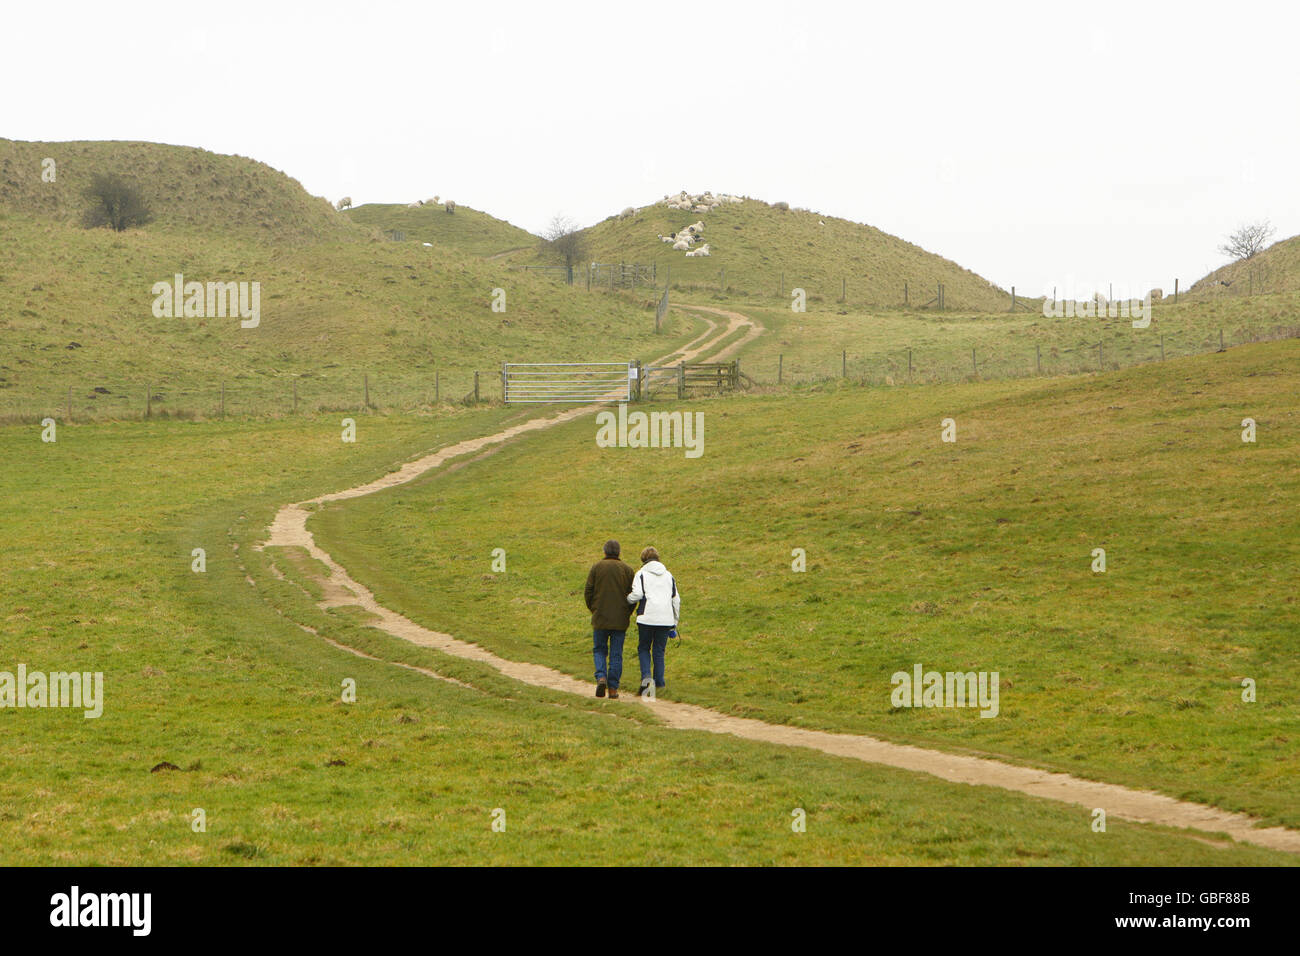 General Stock - Dorset Landmarks. GV of Maiden Castle near Dorchester, Dorset. It is the largest and most complex Iron Age hillfort in the UK. Stock Photo